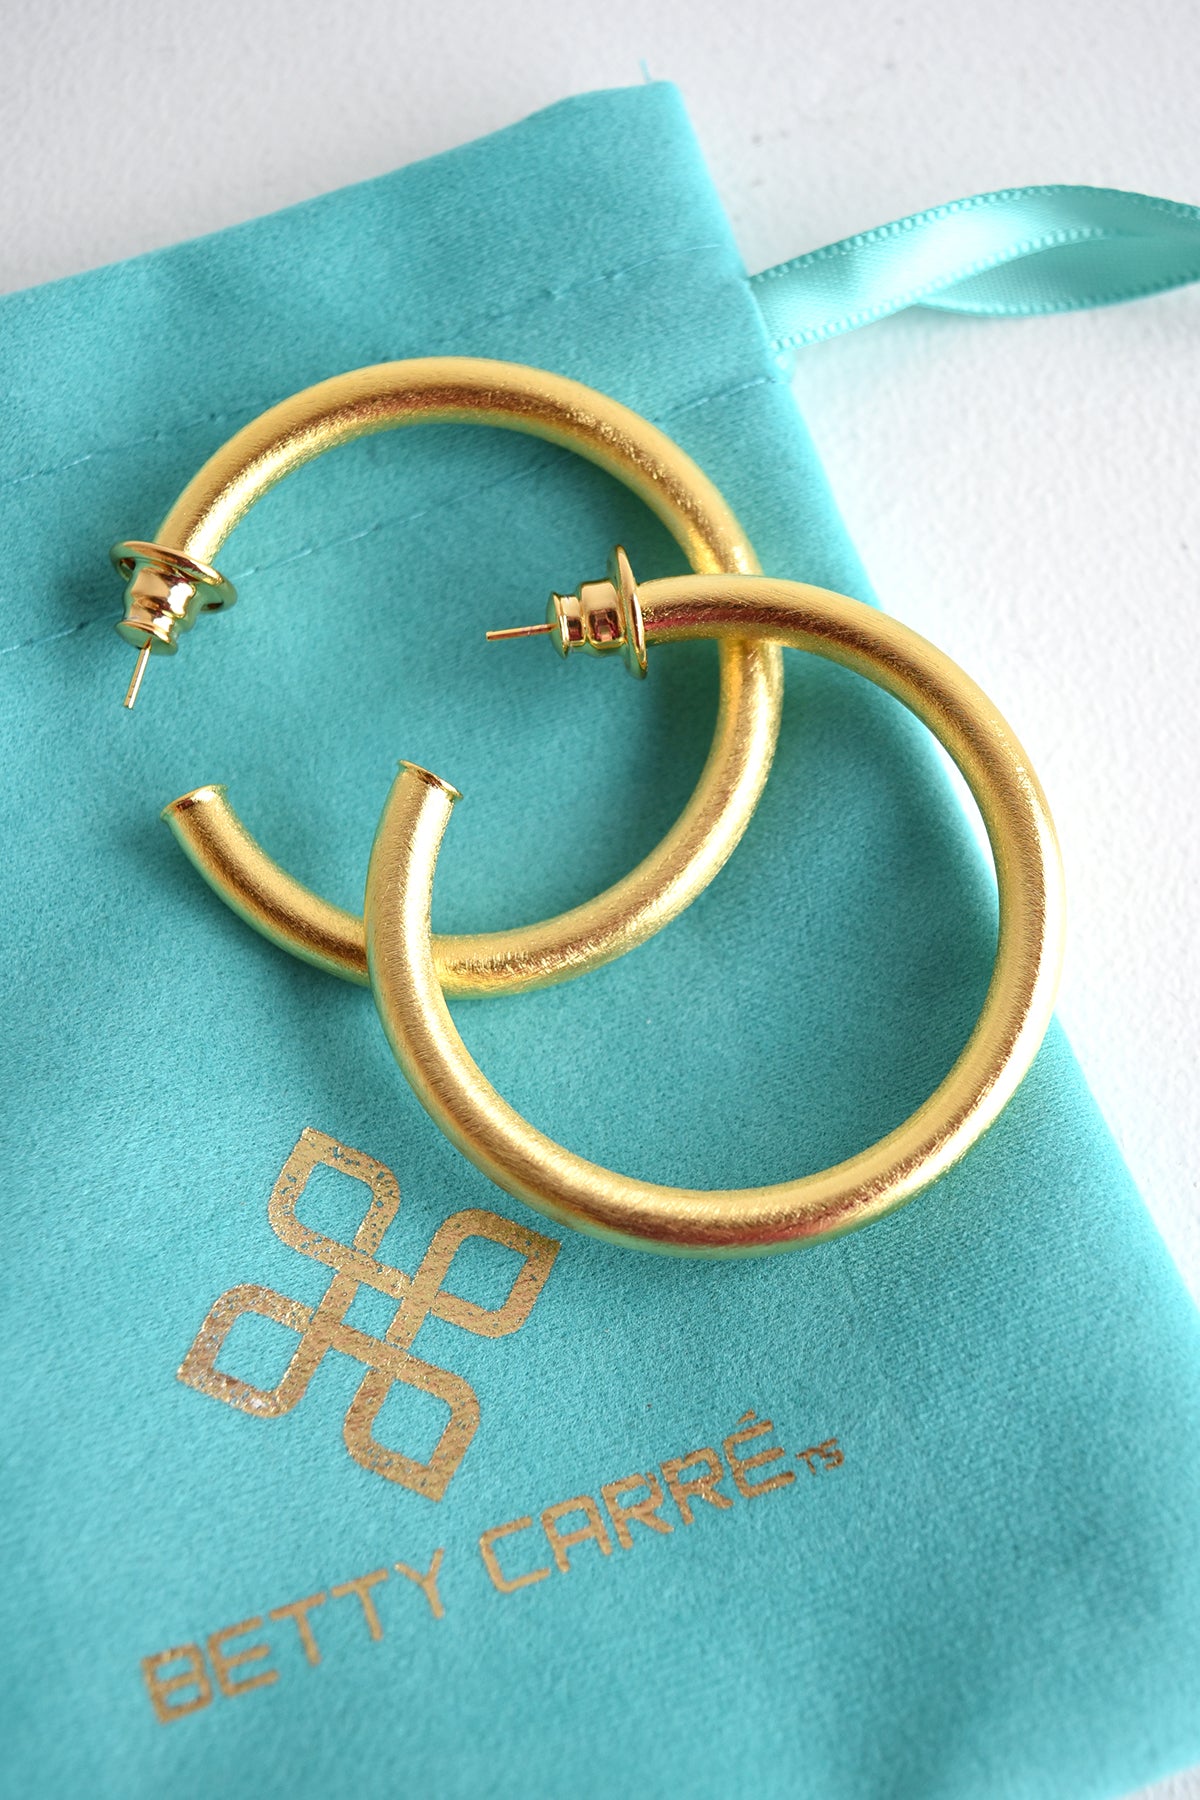 BETTY CARRE 1.5” GOLD HOOPS